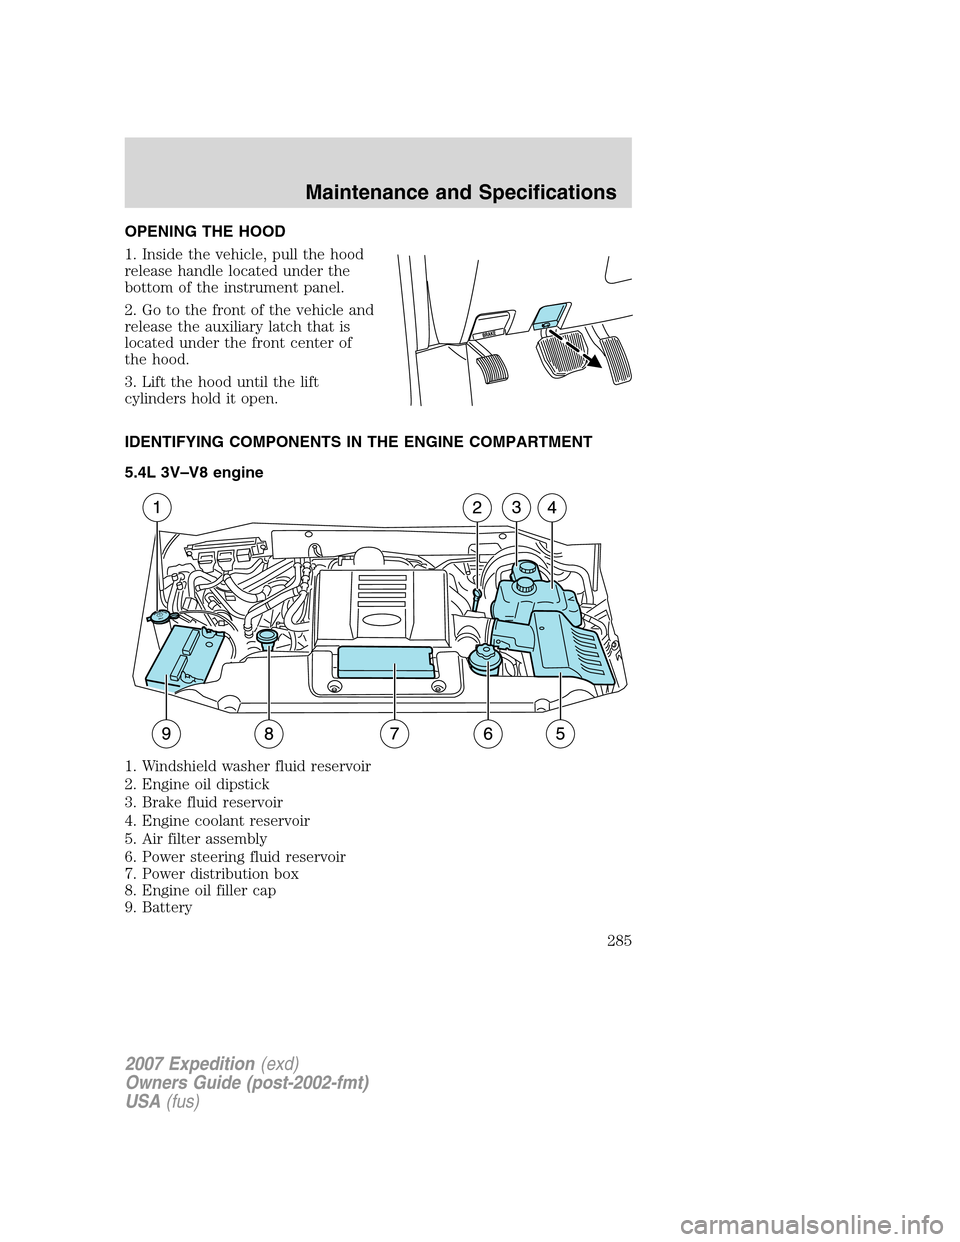 FORD EXPEDITION 2007 3.G Owners Manual OPENING THE HOOD
1. Inside the vehicle, pull the hood
release handle located under the
bottom of the instrument panel.
2. Go to the front of the vehicle and
release the auxiliary latch that is
located